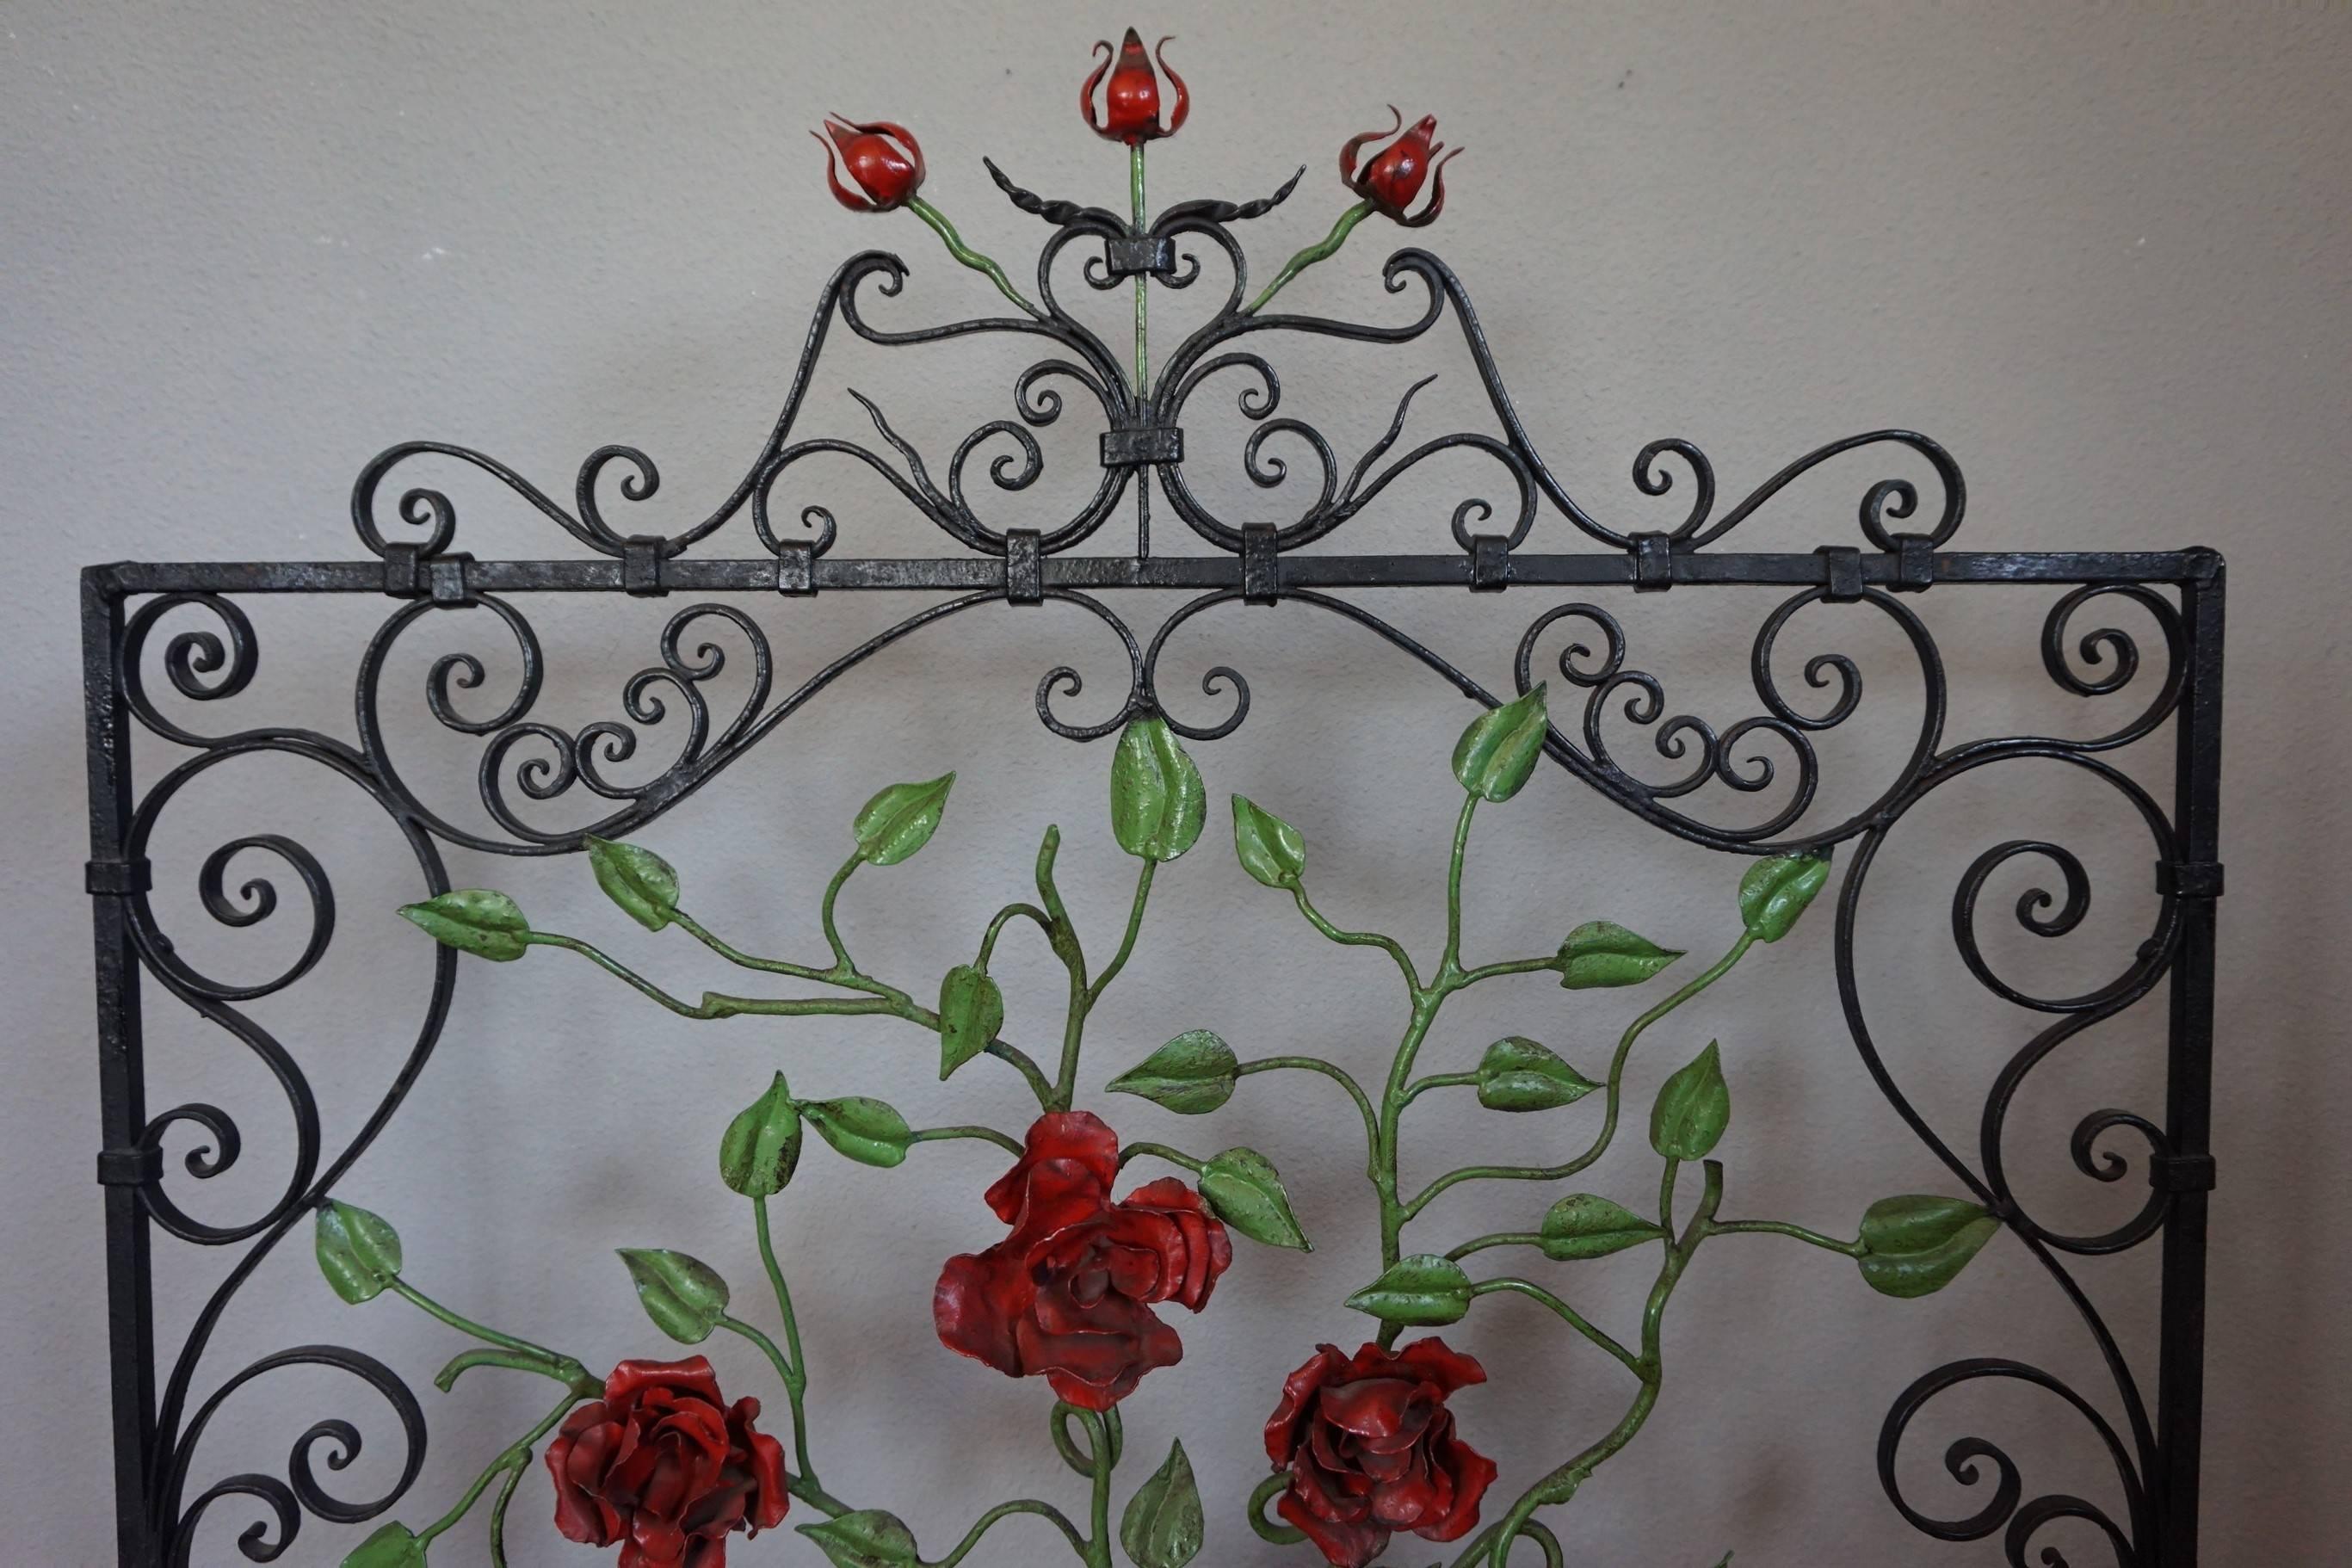 Arts and Crafts Early 20th Century Handcrafted Wrought Iron Firescreen with Roses in Vase Decor